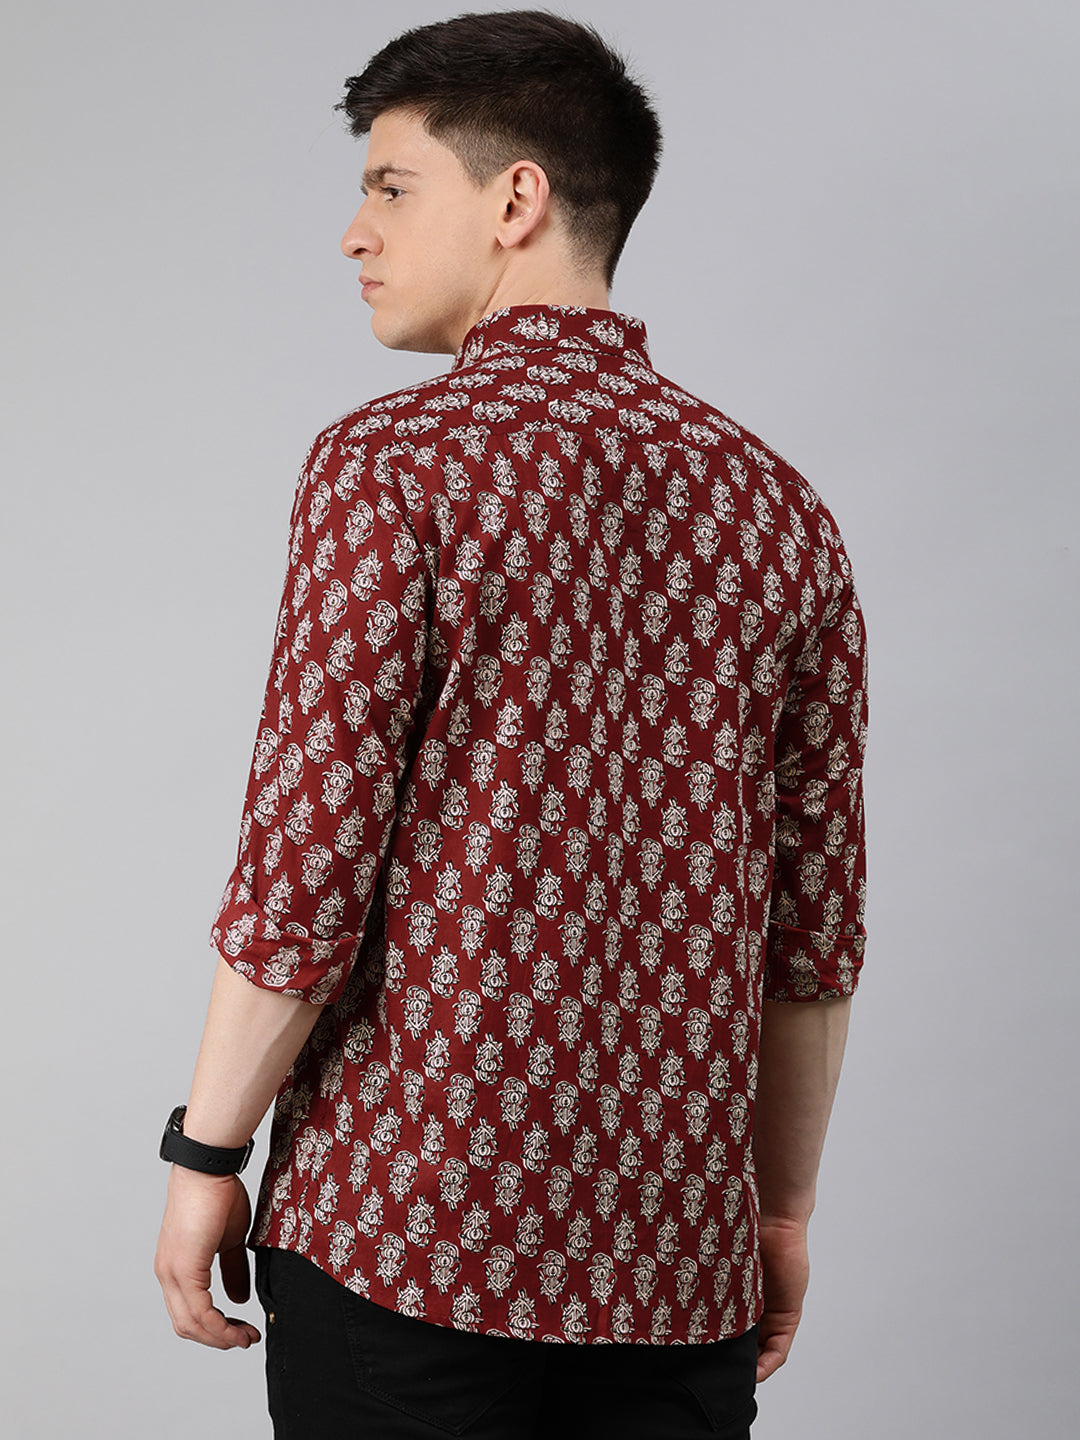 Maroon Cotton Full Sleeves Shirts For Men